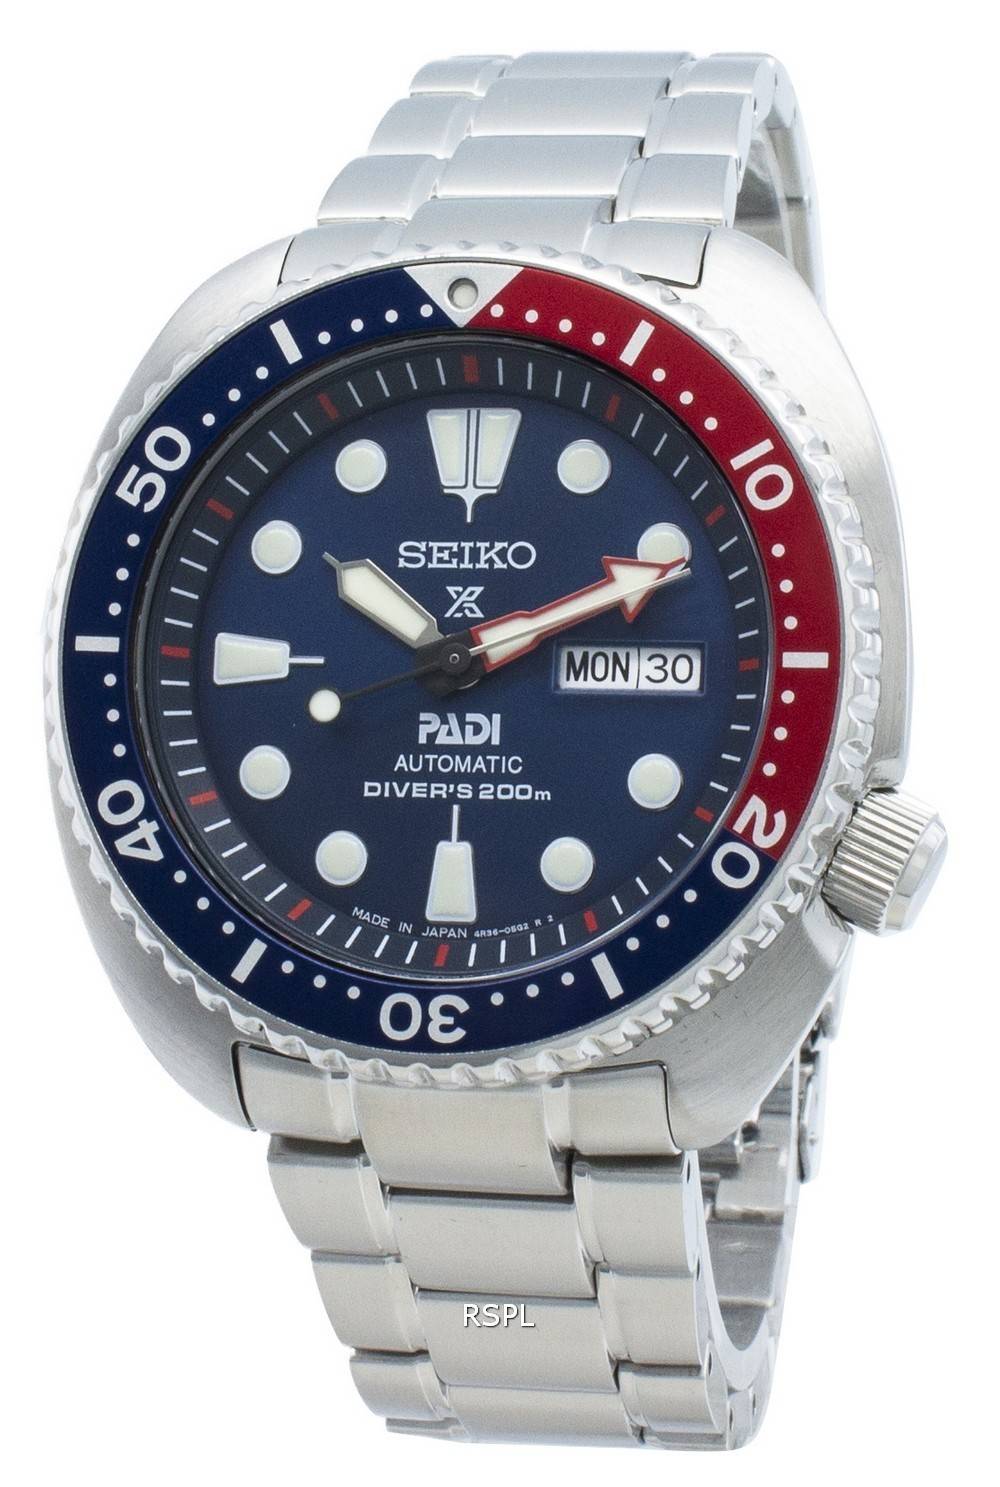 Seiko Prospex SBDY017 Padi Special Edition Automatic Japan Made 200M ...